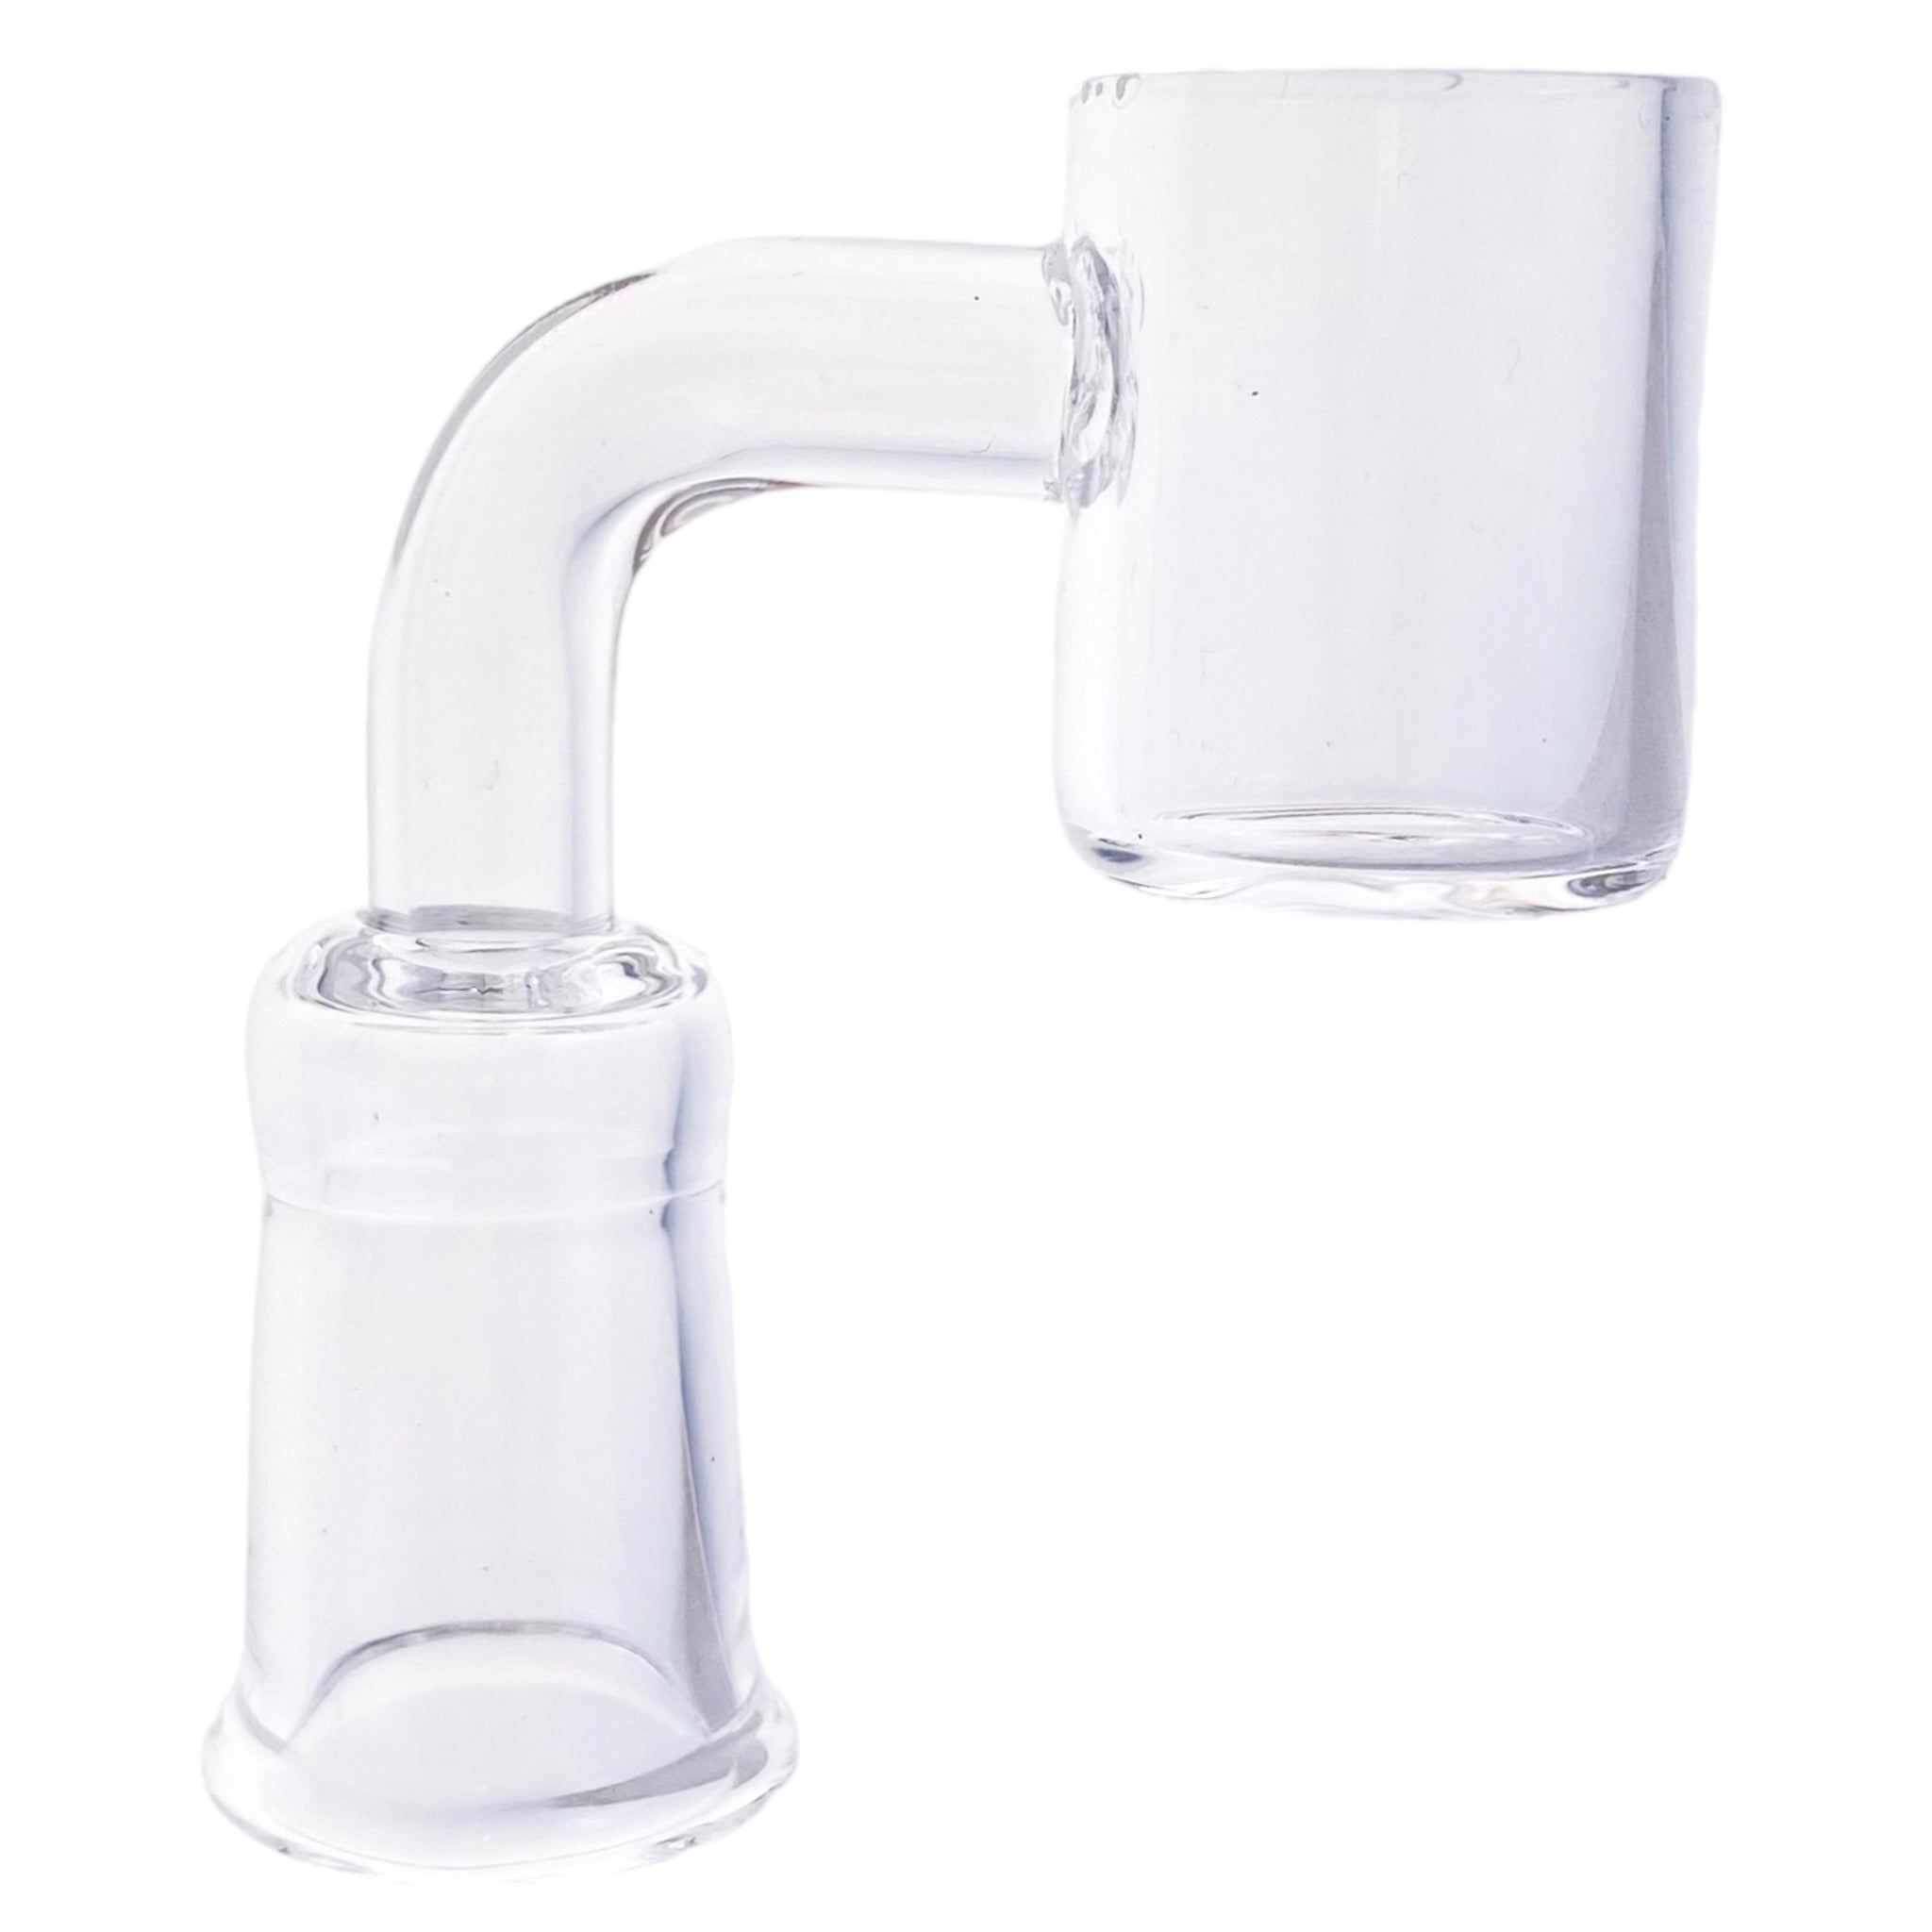 14mm Quartz Banger With 90 Degree Female Fitting And 20mm Wide Bucket